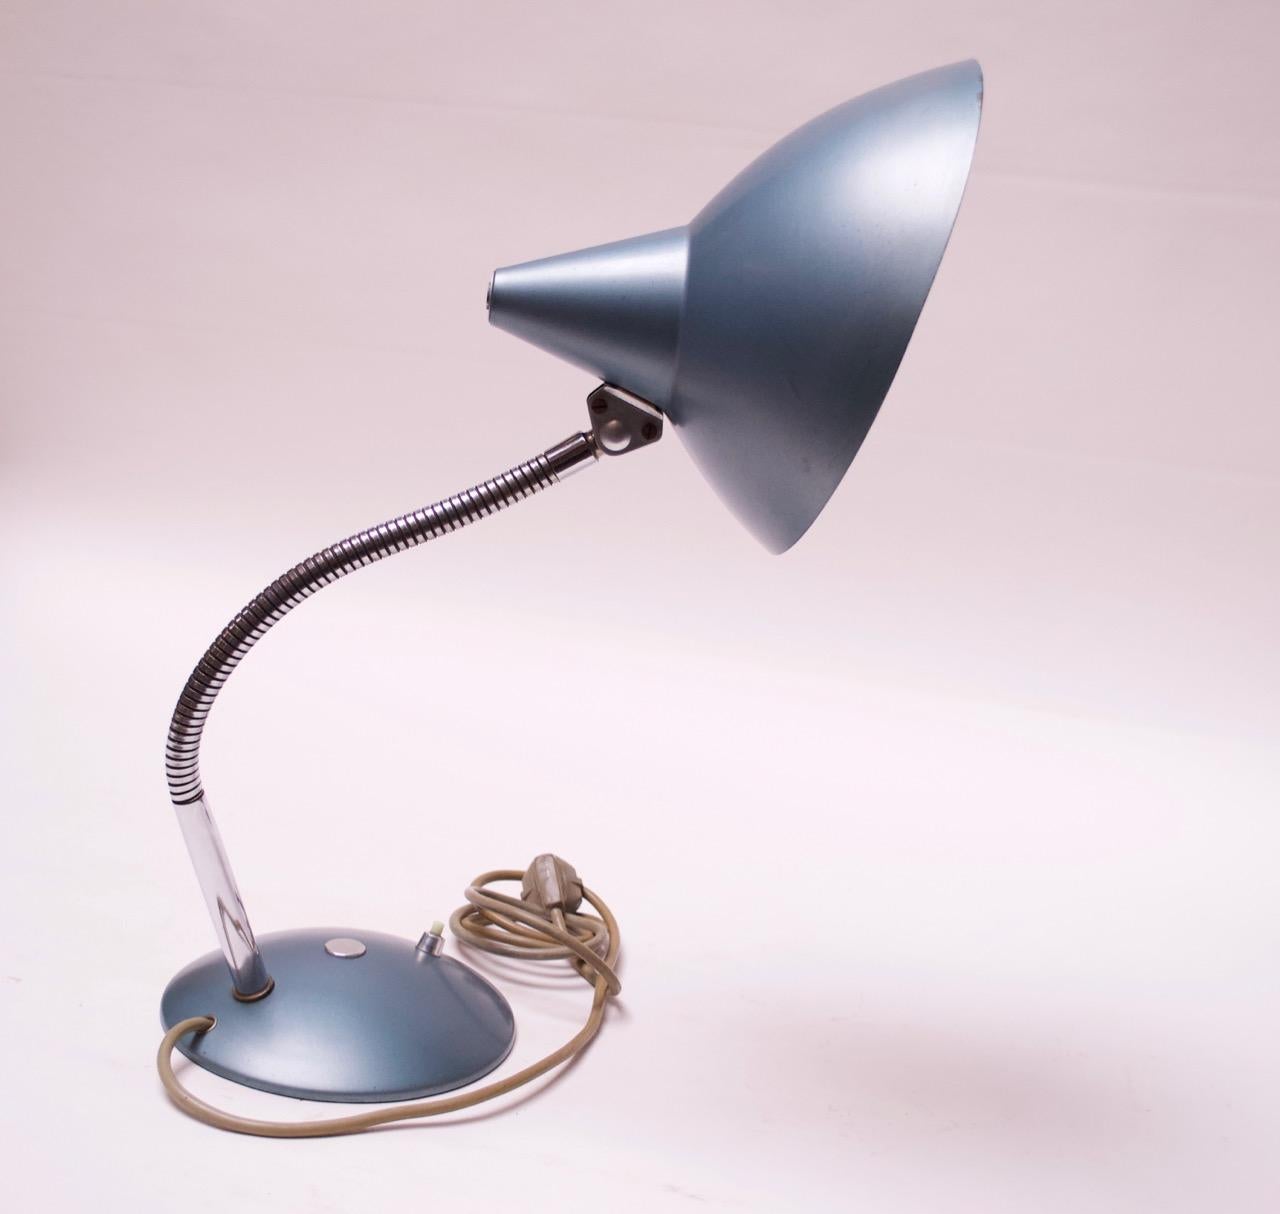 Midcentury German Gooseneck Table Lamp in Metallic Blue by Helo Leuchten In Good Condition For Sale In Brooklyn, NY